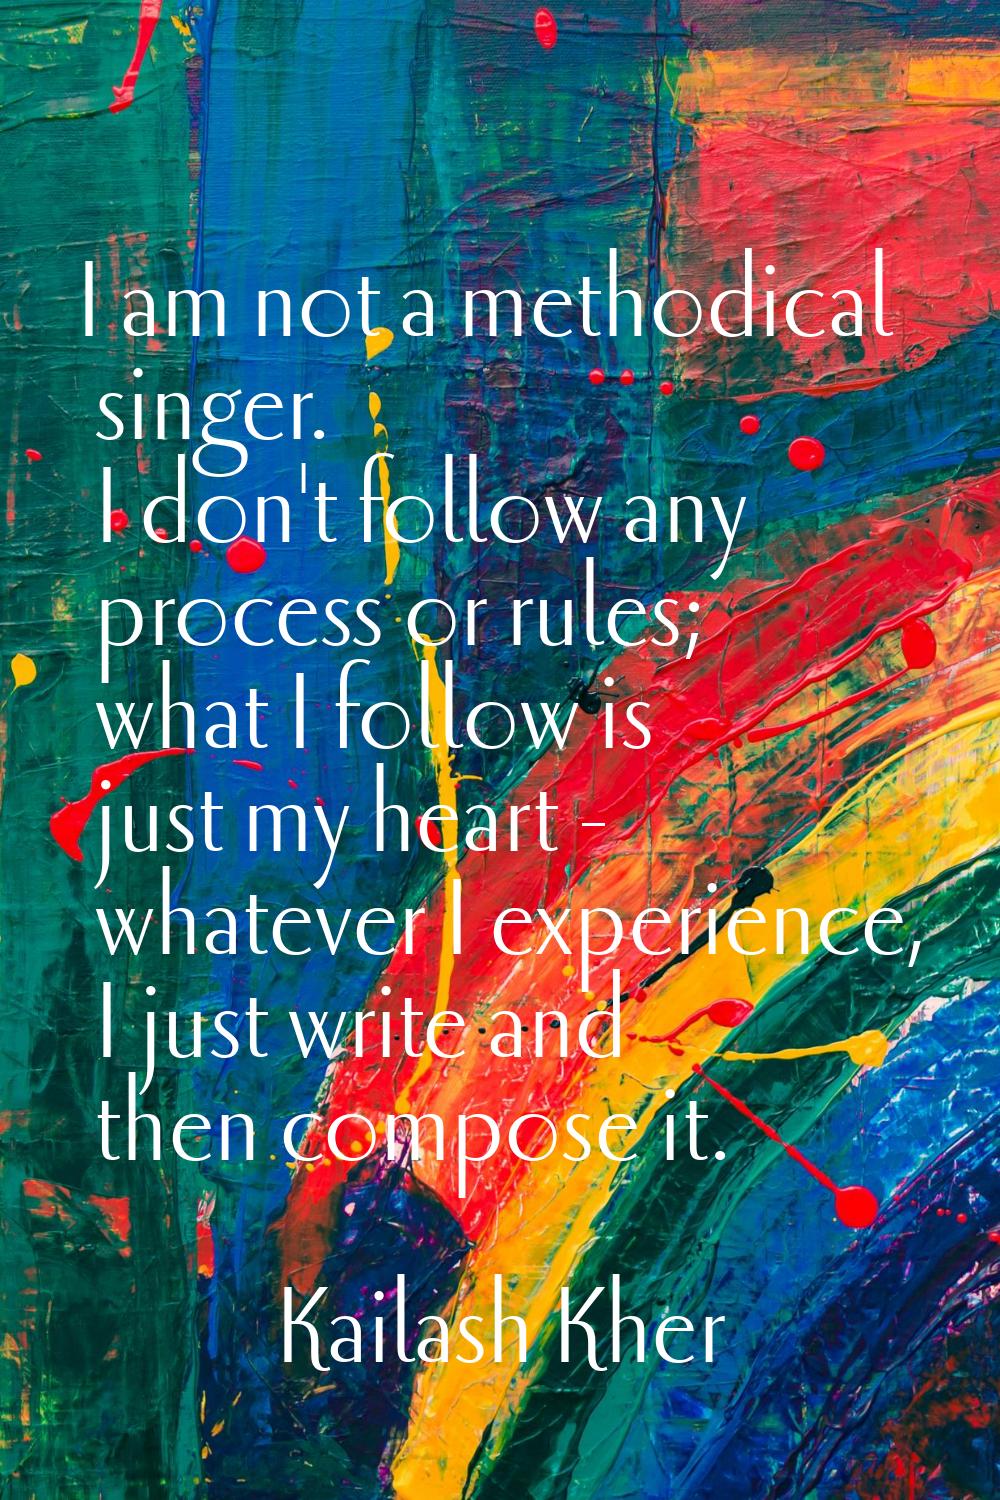 I am not a methodical singer. I don't follow any process or rules; what I follow is just my heart -